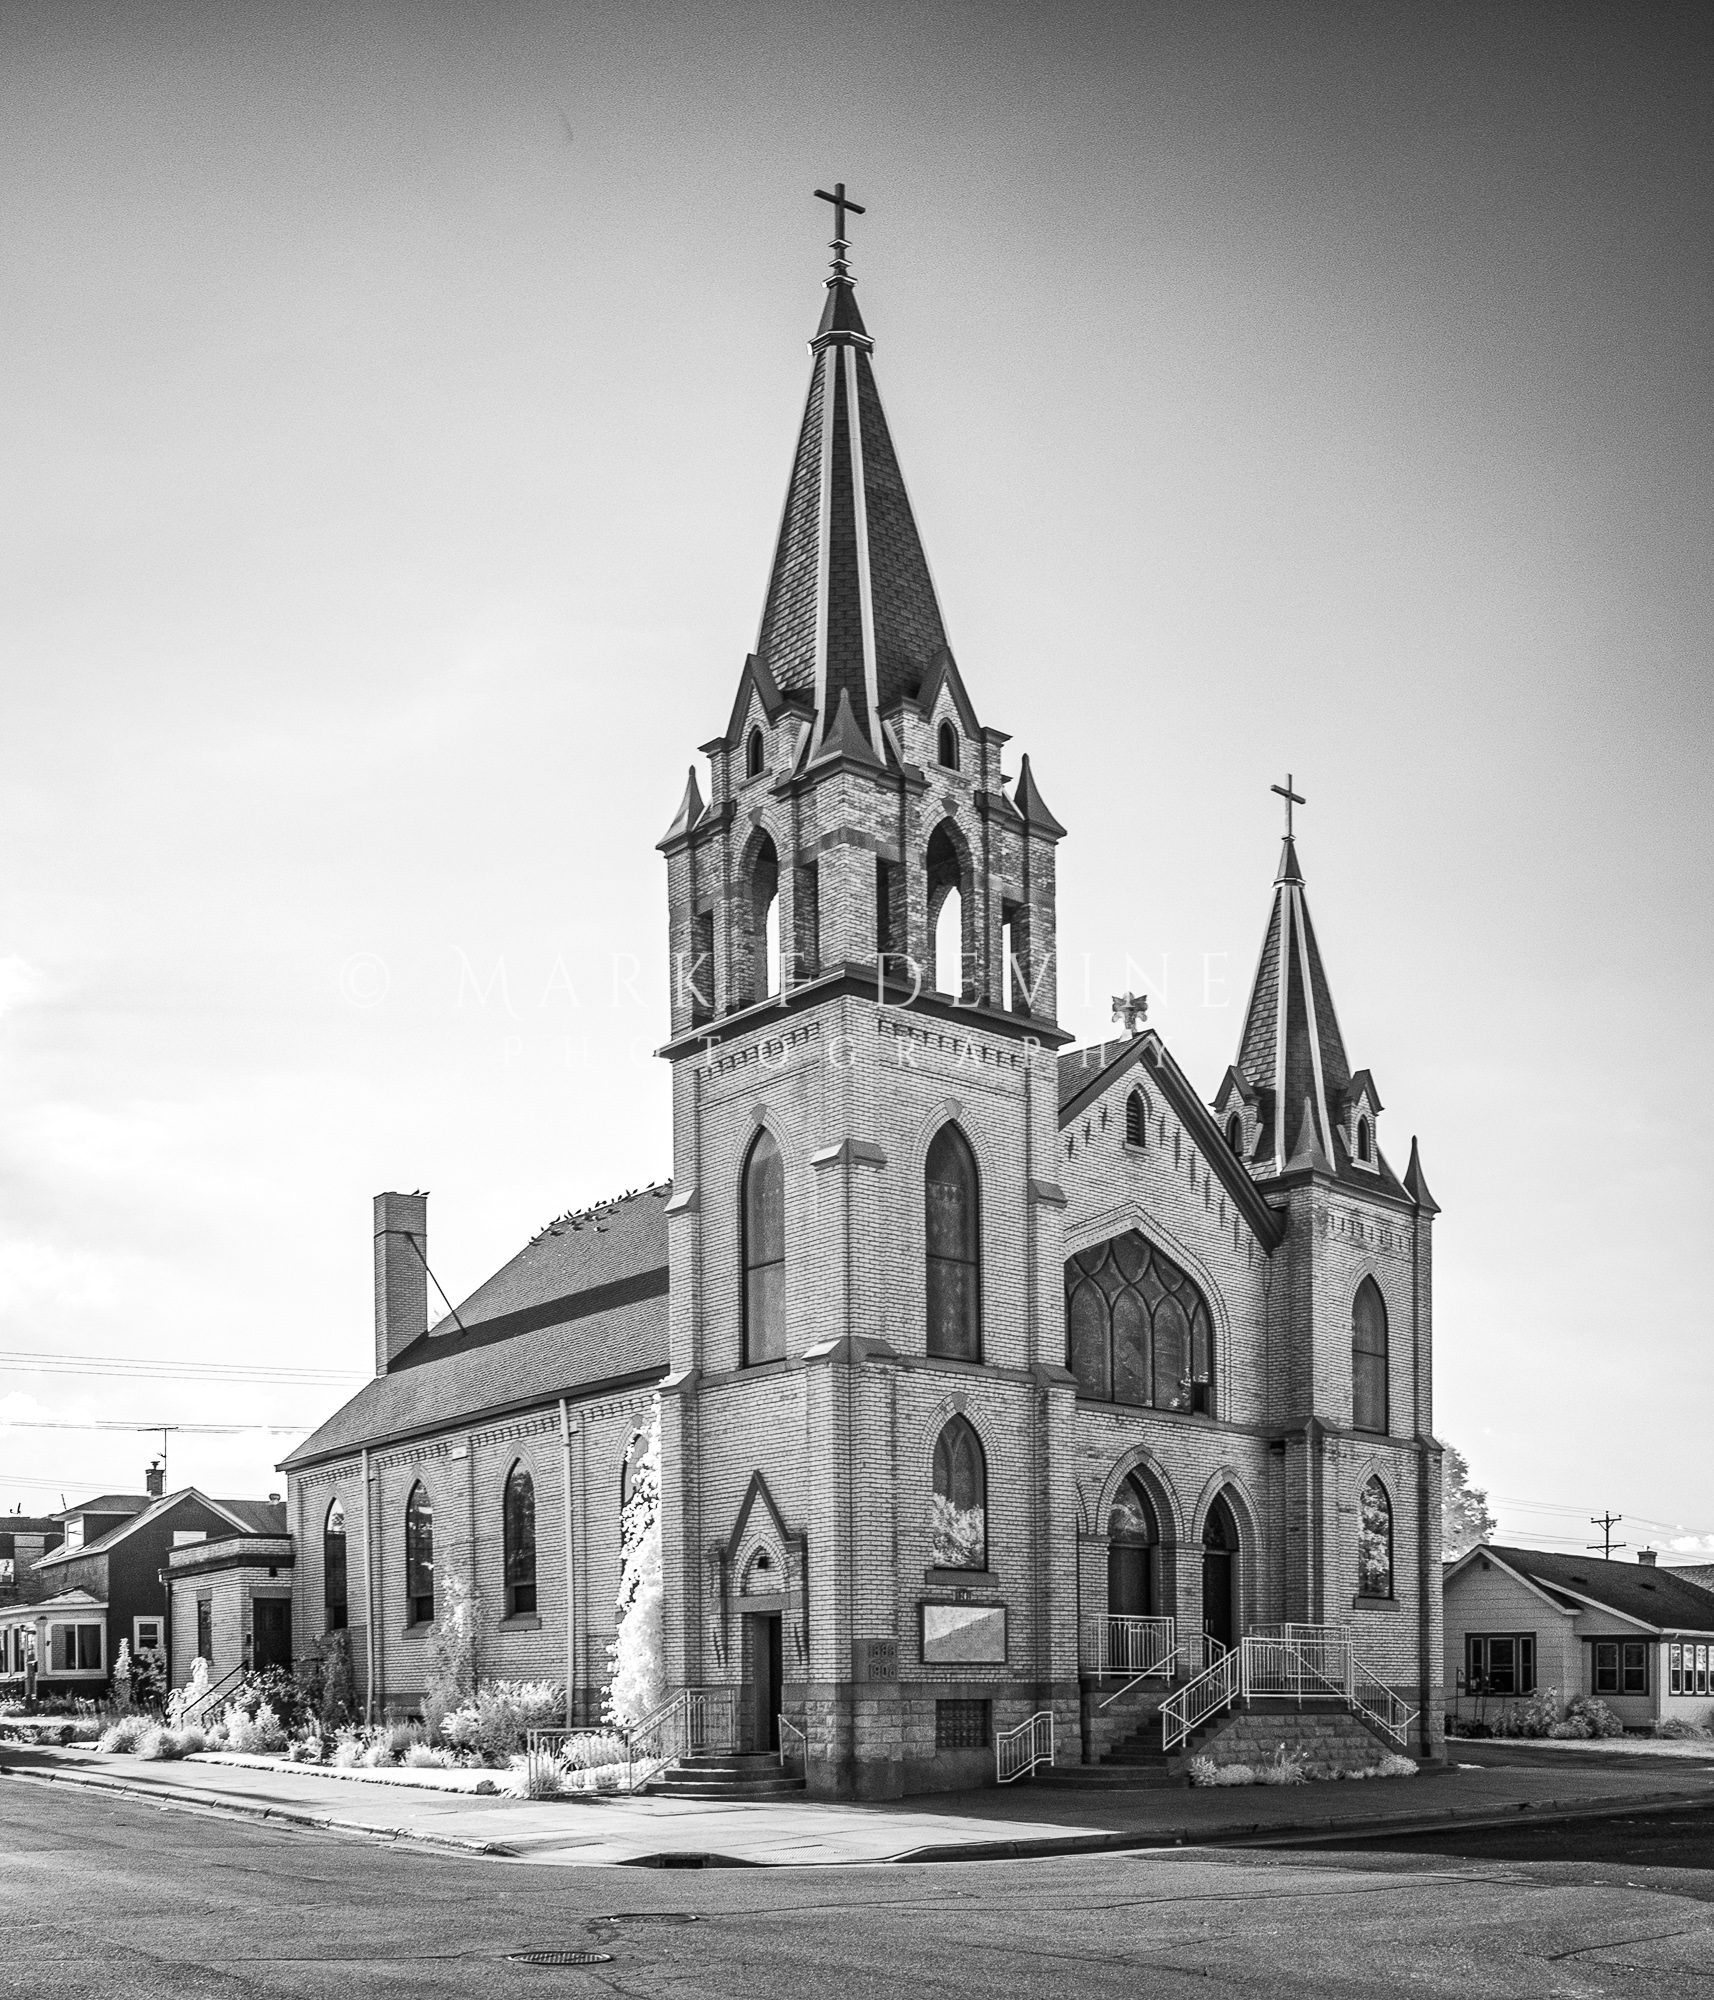 Infrared image of Immanuel Lutheran Church.